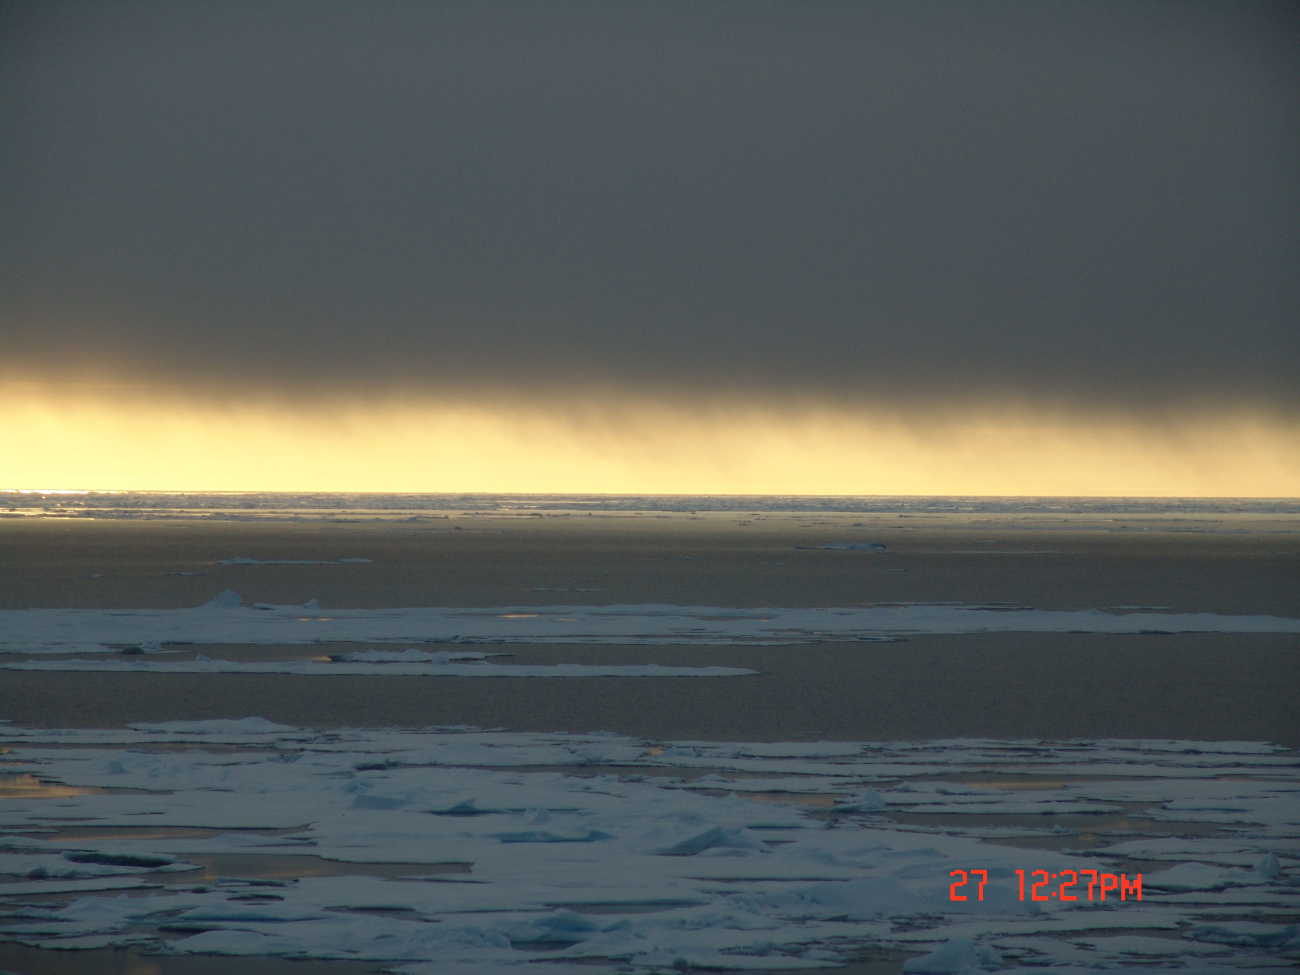 A dark blanket of cloud framing a yellow-gold sun illuminated horizon withice floes and a polynya below